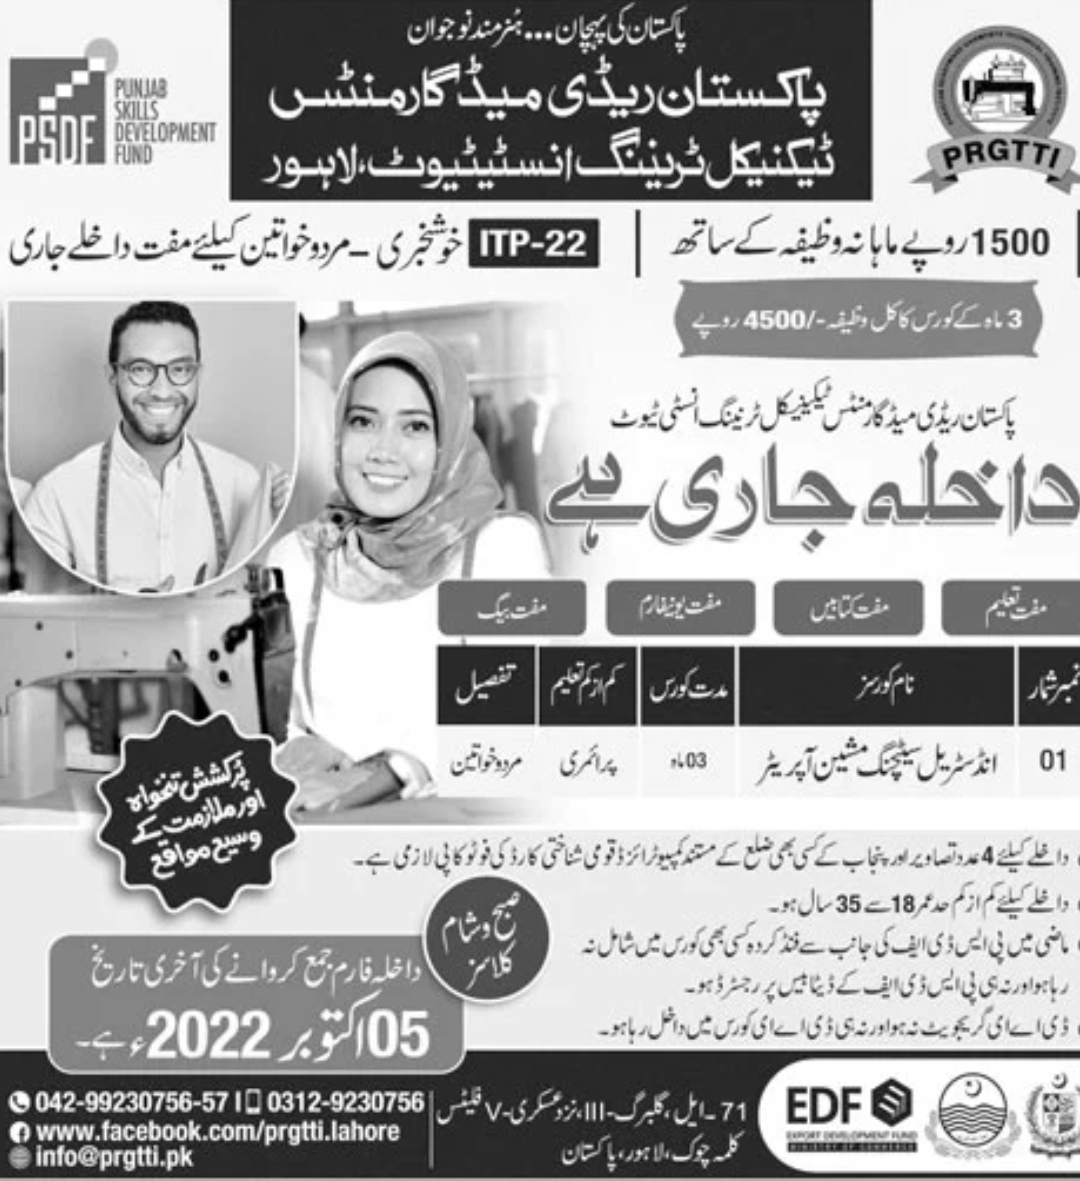 Industrial stitching Machine Operator course, Short course, technical training, vocational training, Lahore,admission-in-punjab,